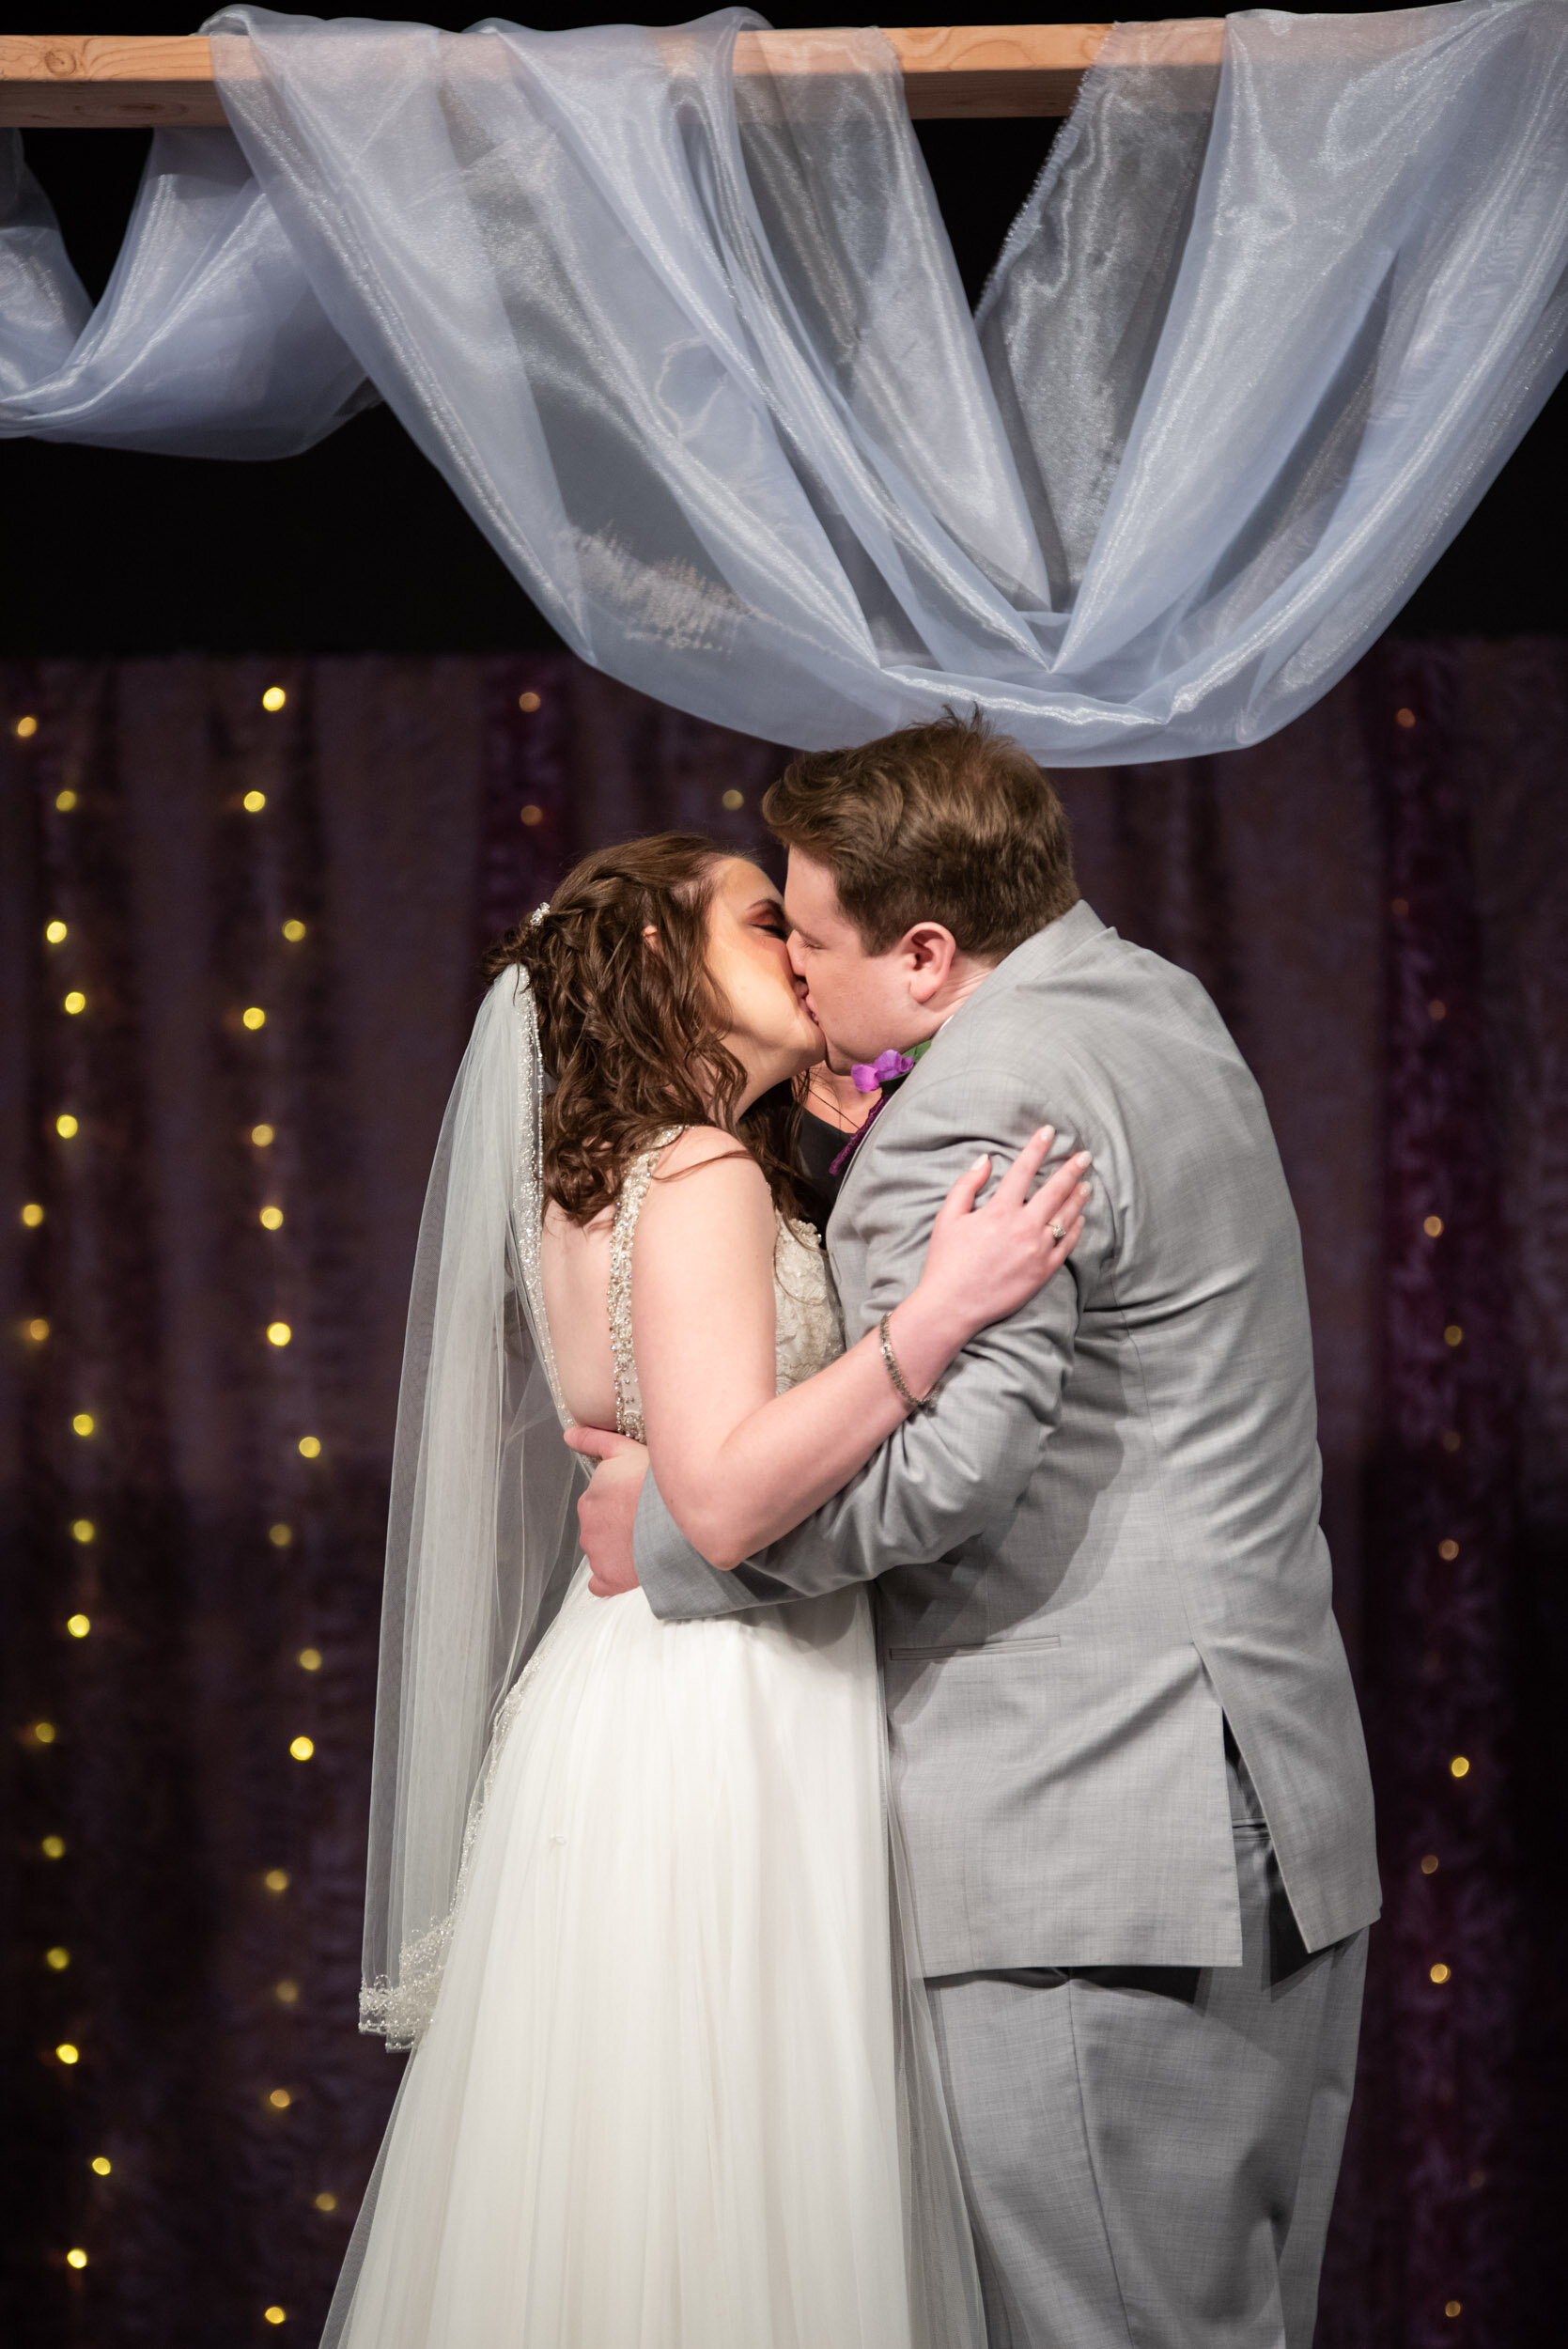 Meg and Anthony's wedding at Barre Players Theater in Barre, MA photographed by Kara Emily Krantz Photography